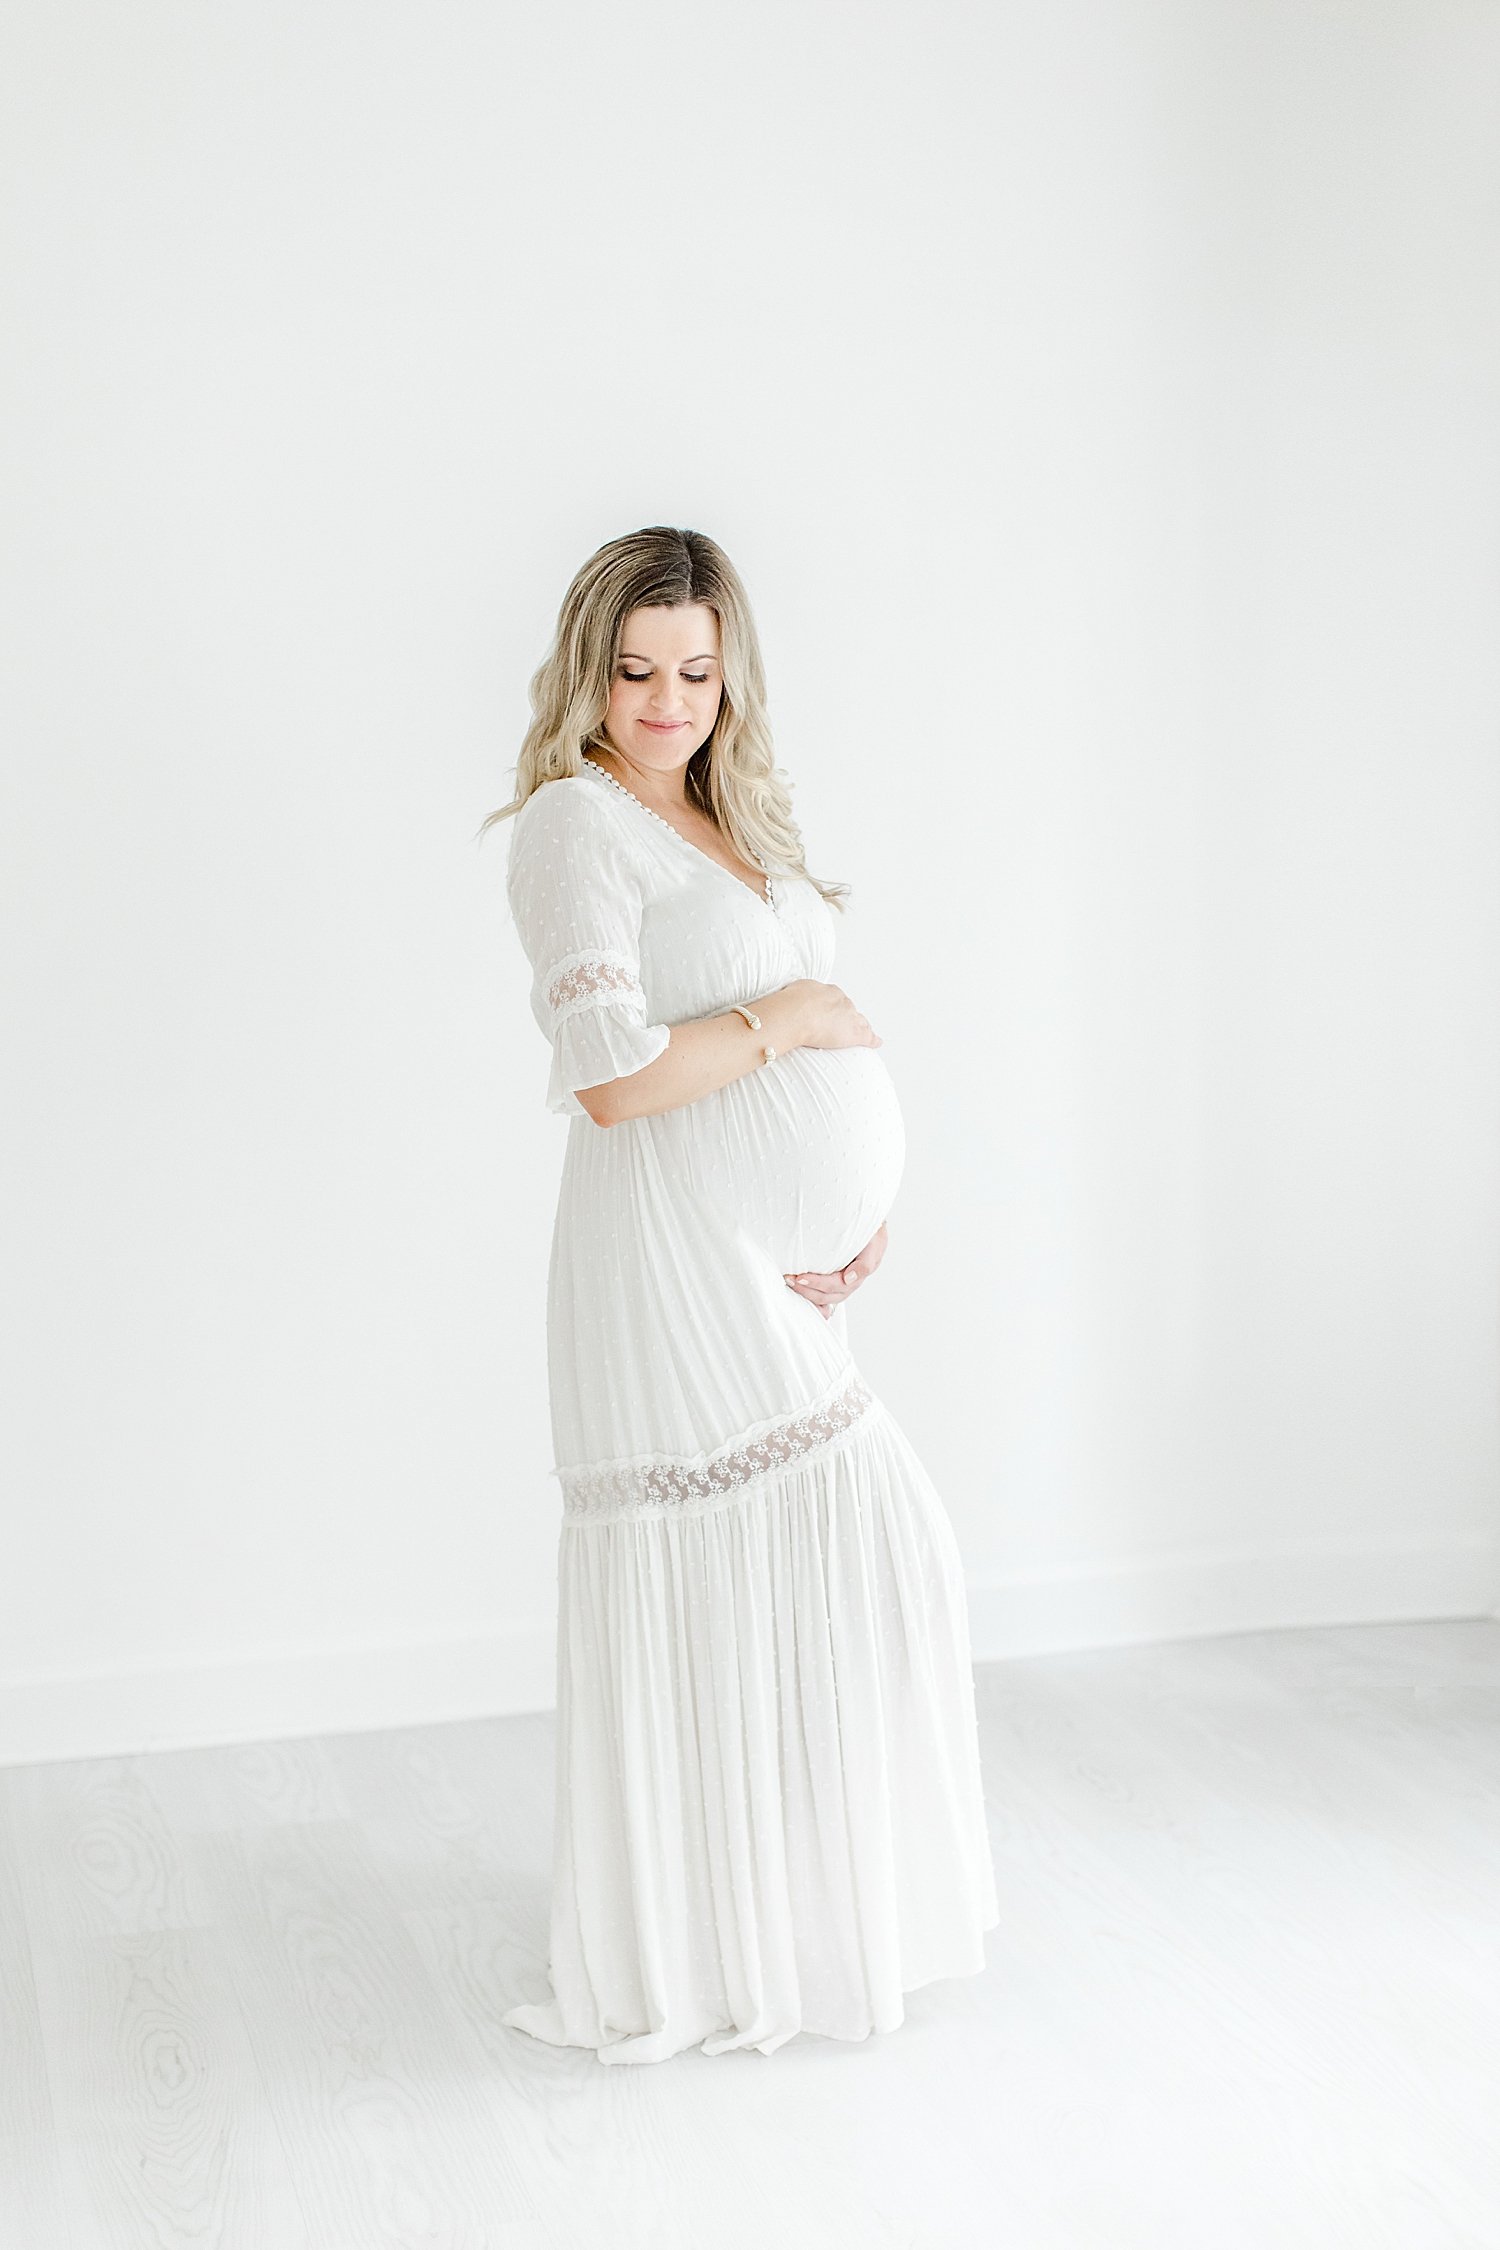 Pregnant mom wearing a white dress for studio maternity session | Kristin Wood Photography